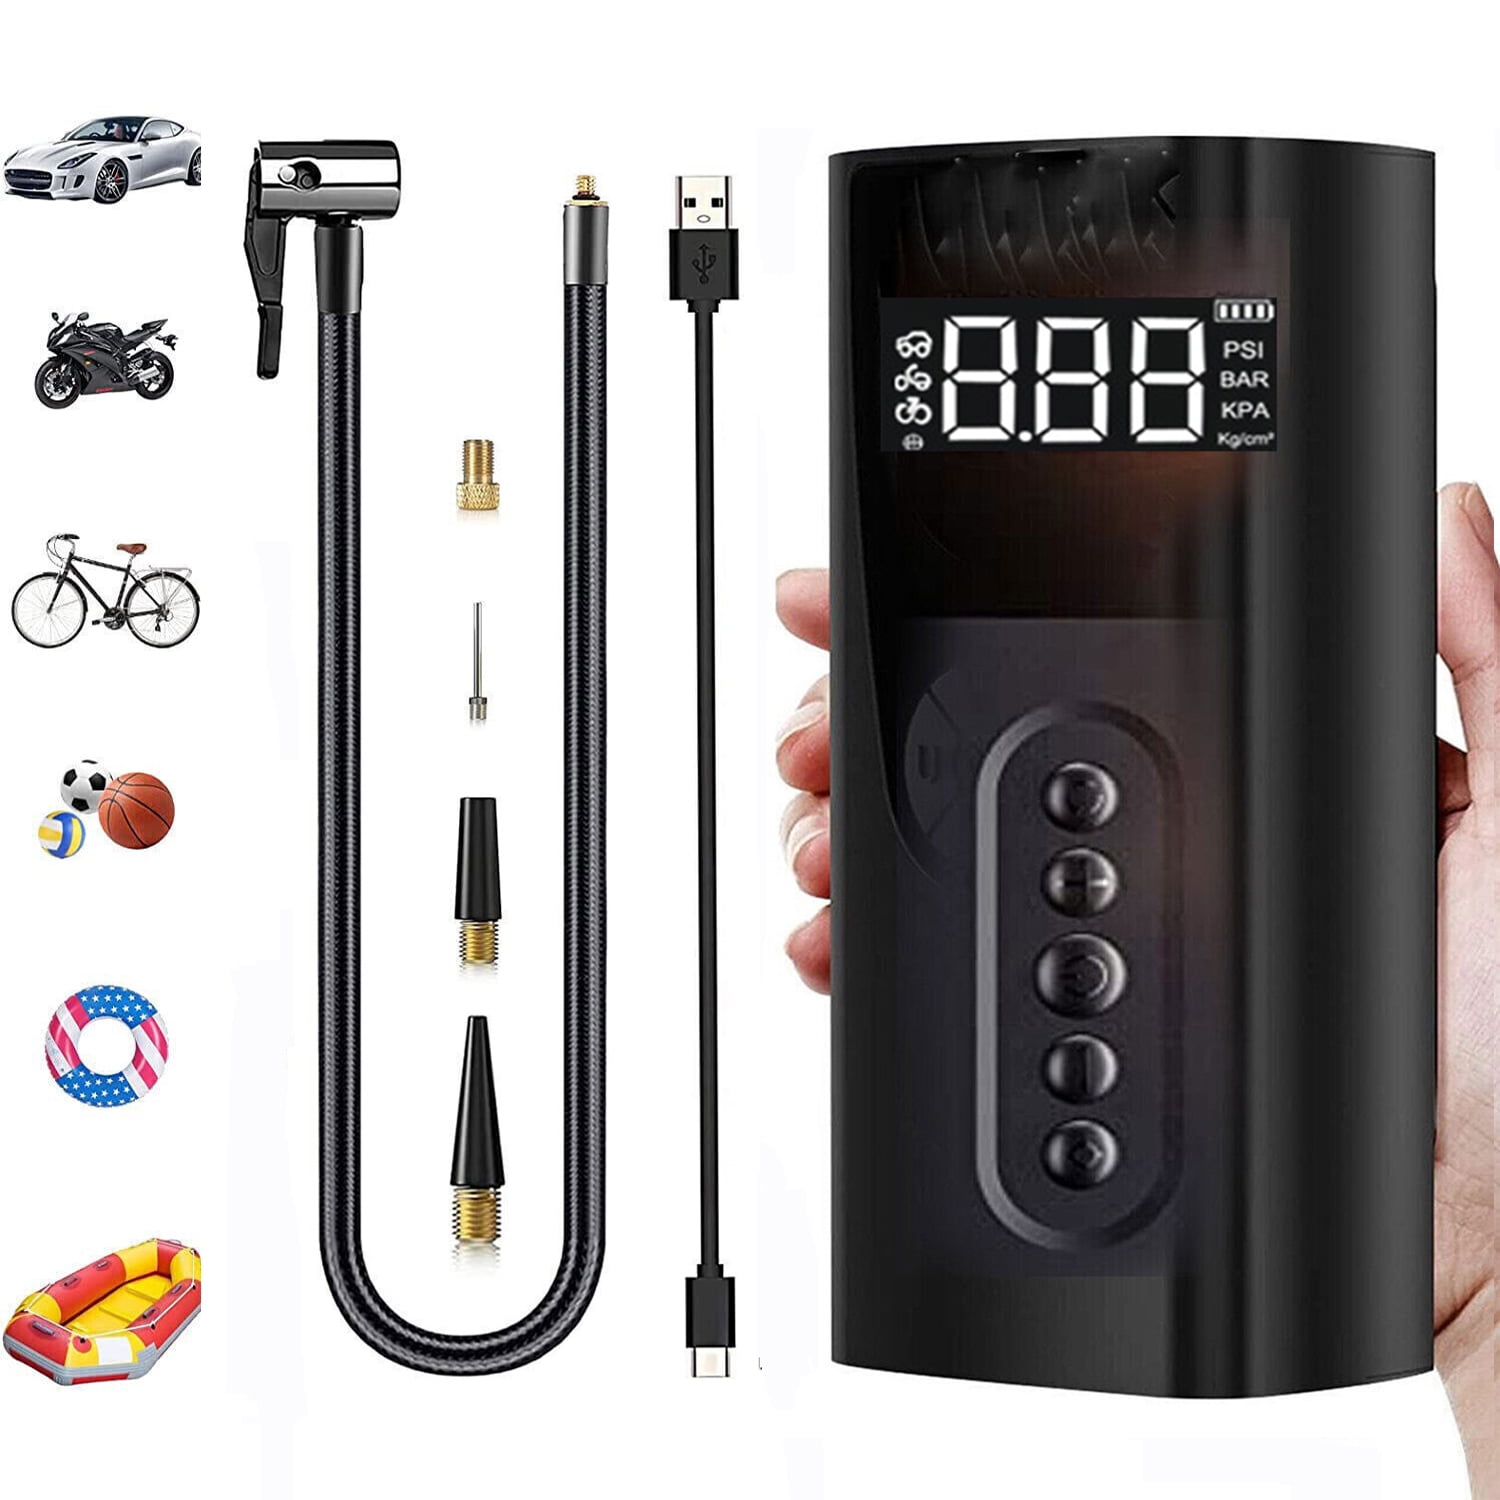 Xiaomi Portable Electric Air Compressor, 150 PSI Tire Inflator for Car,  Scooter, Bike Tires and Balls - Cordless with Digital Pressure Detection